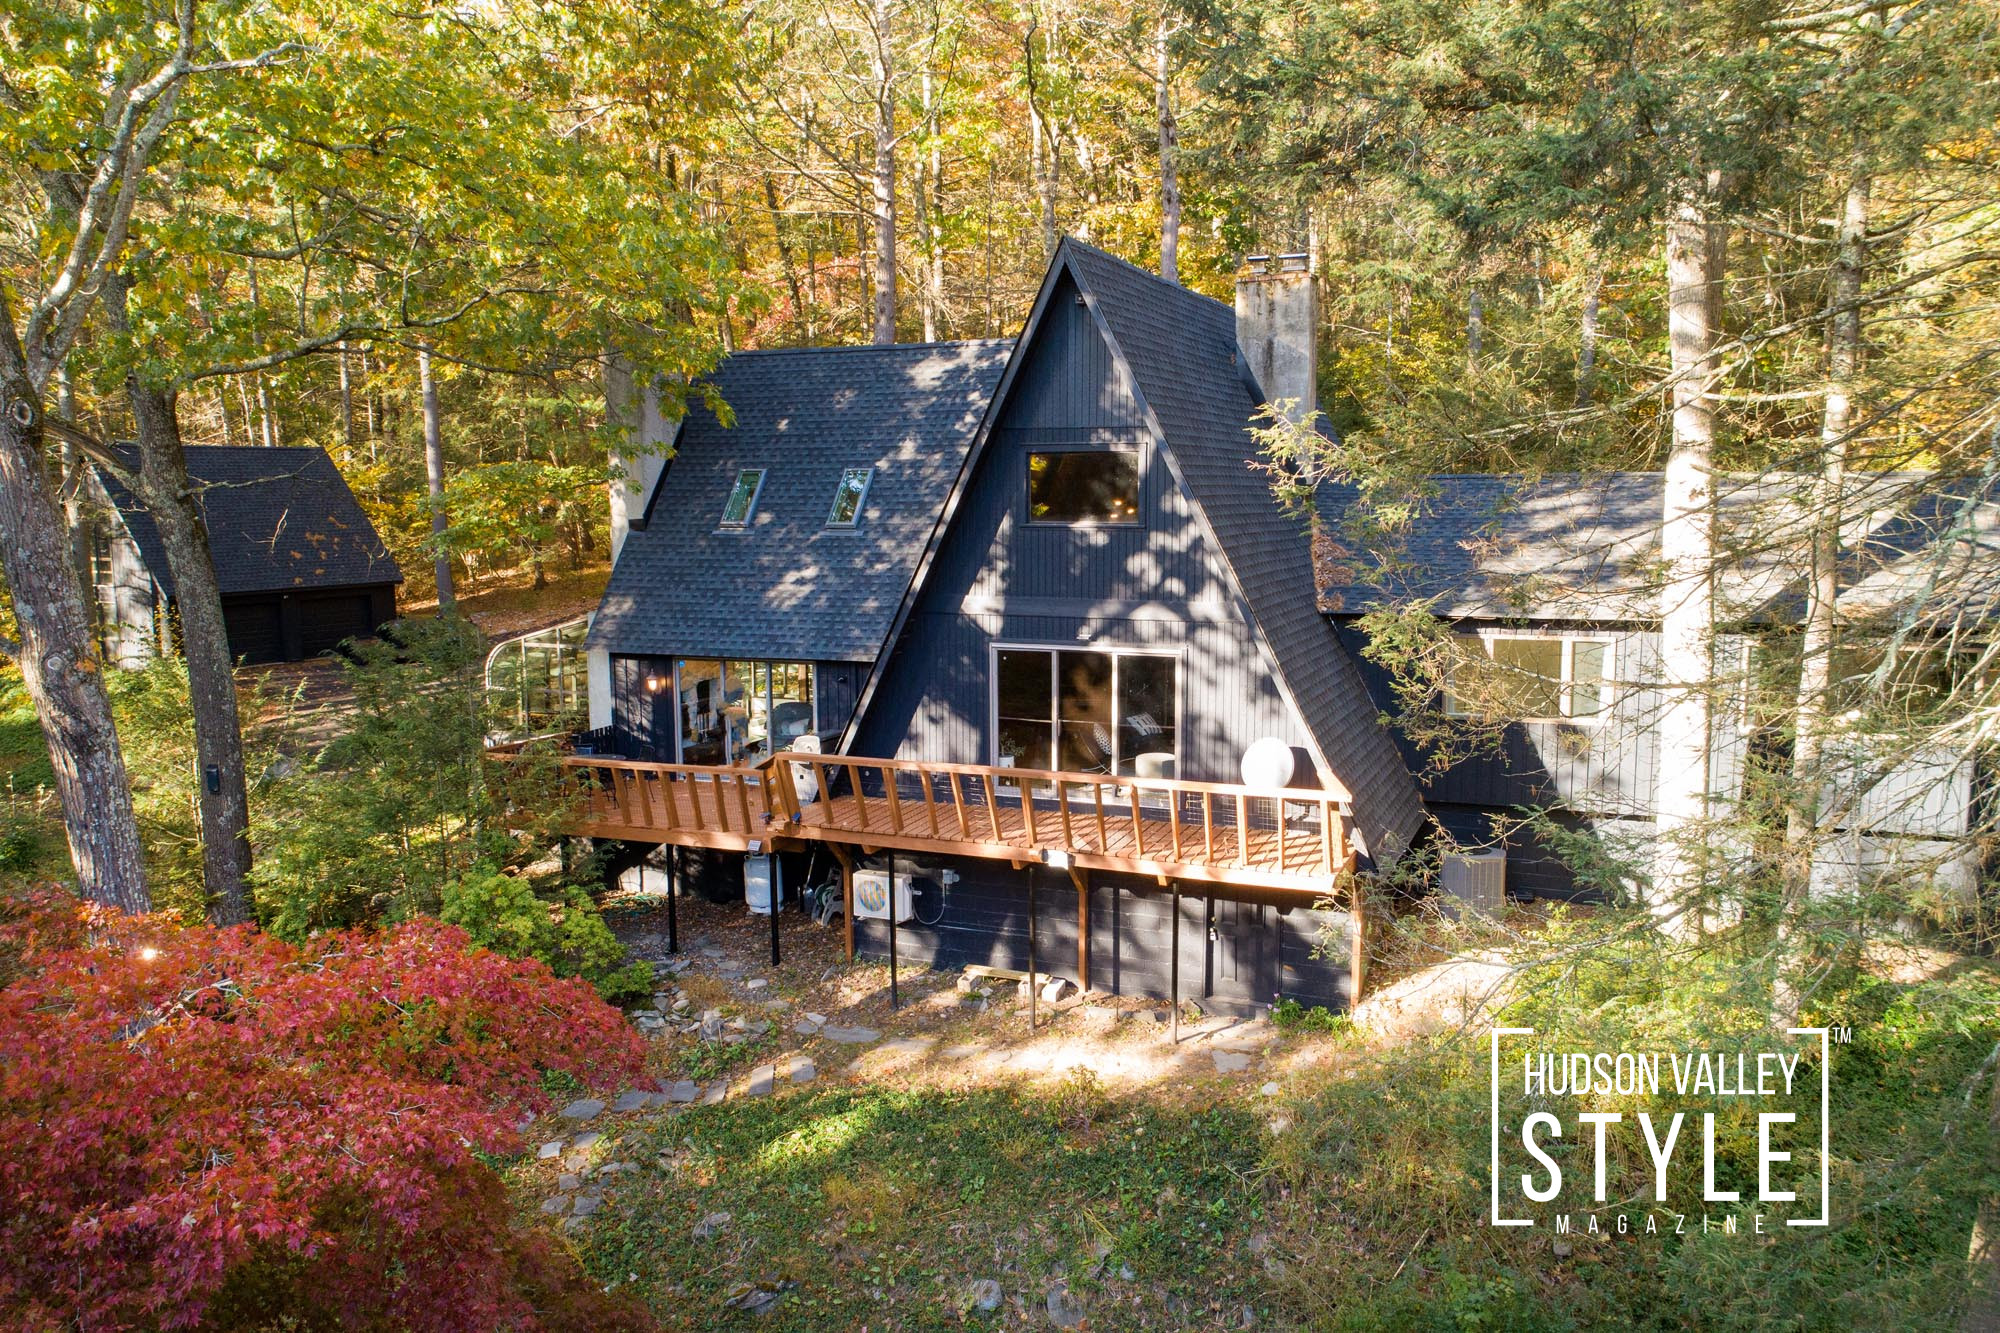 A-Frames Anonymous: Confessions of an A-Frame Addict – Why the Hudson Valley and Catskills Can't Get Enough of A-Frame Cabins – by Photographer Maxwell Alexander – Presented by Alluvion Media